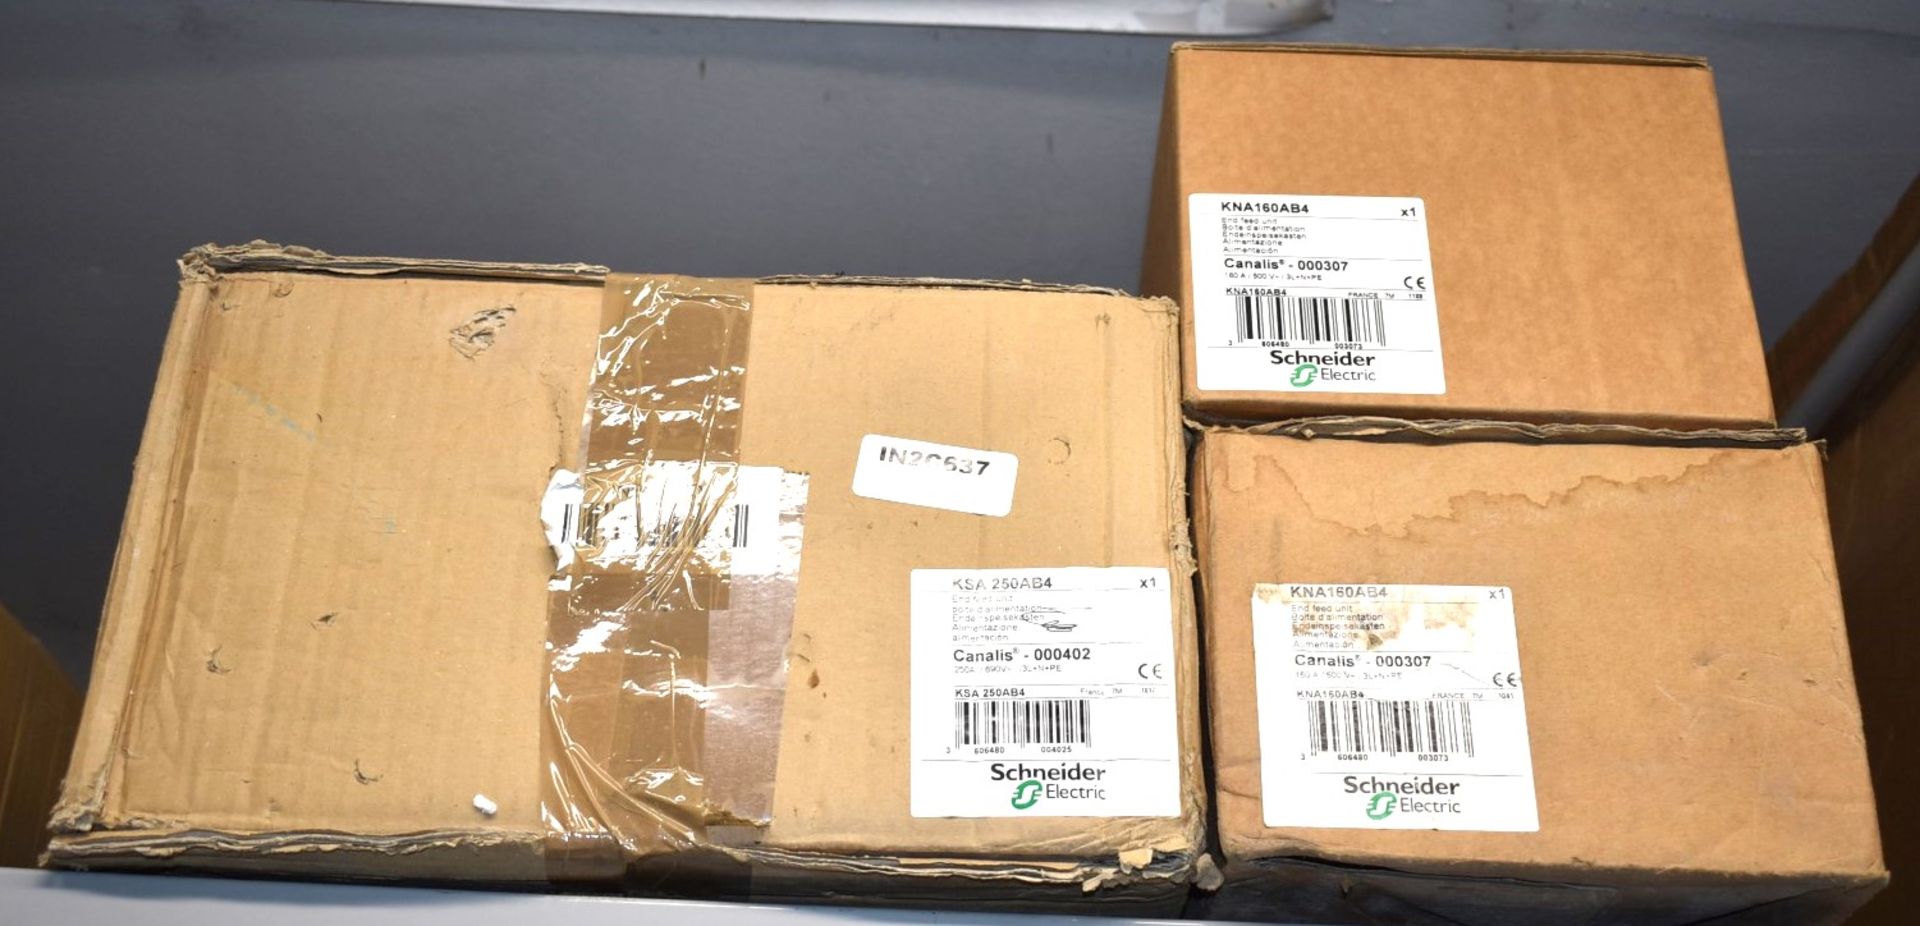 3 x Schneider Electric Canalis End Feed Units - Types KSA250AB4 & KNA160AB4 - RRP £1,360 - Image 7 of 7